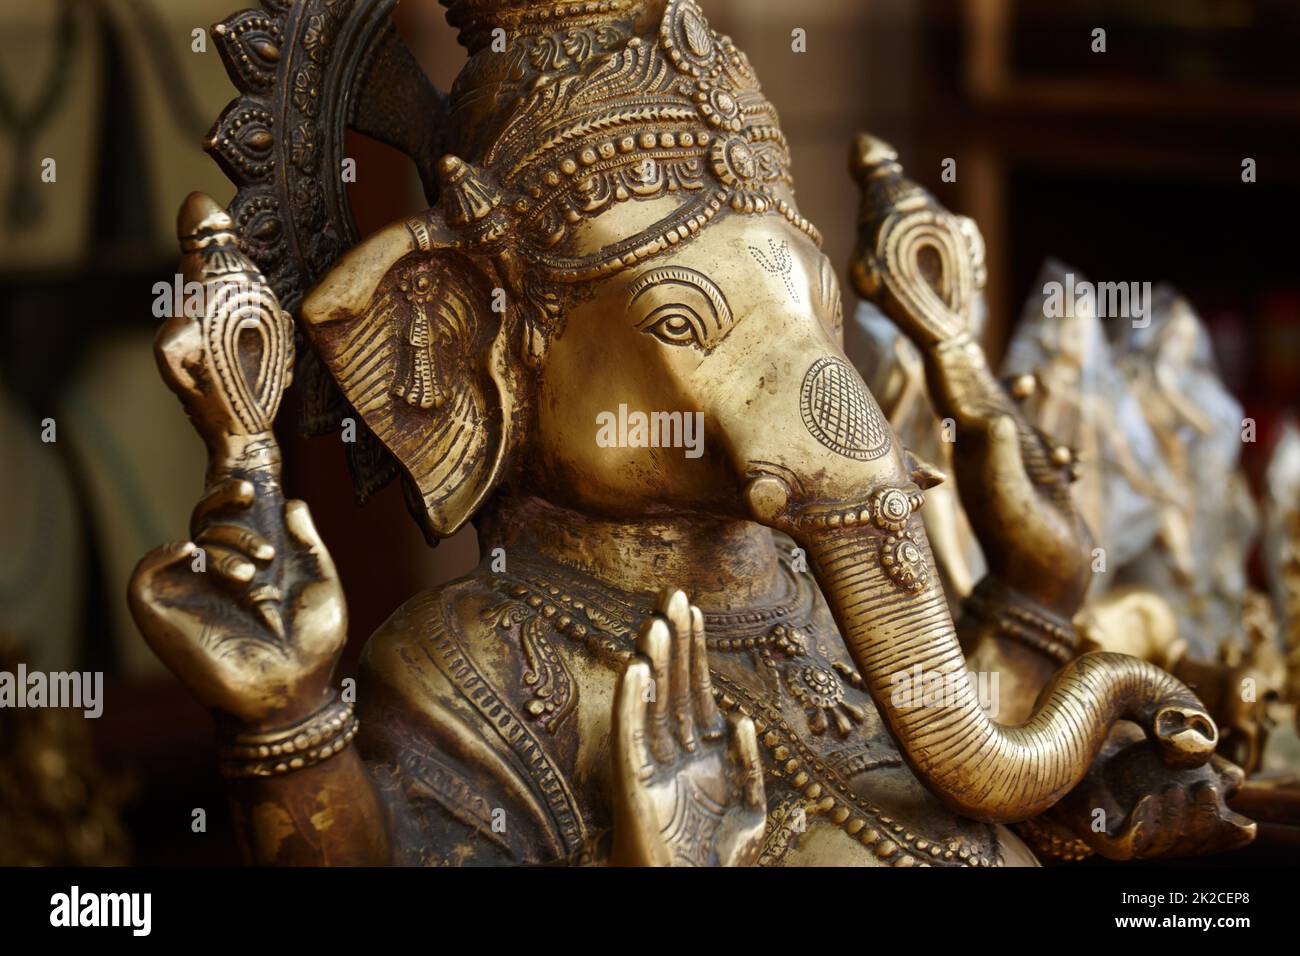 Beautifully crafted iconography. Closeup of a bronze effigy of the god Ganesha in an Indian temple. Stock Photo